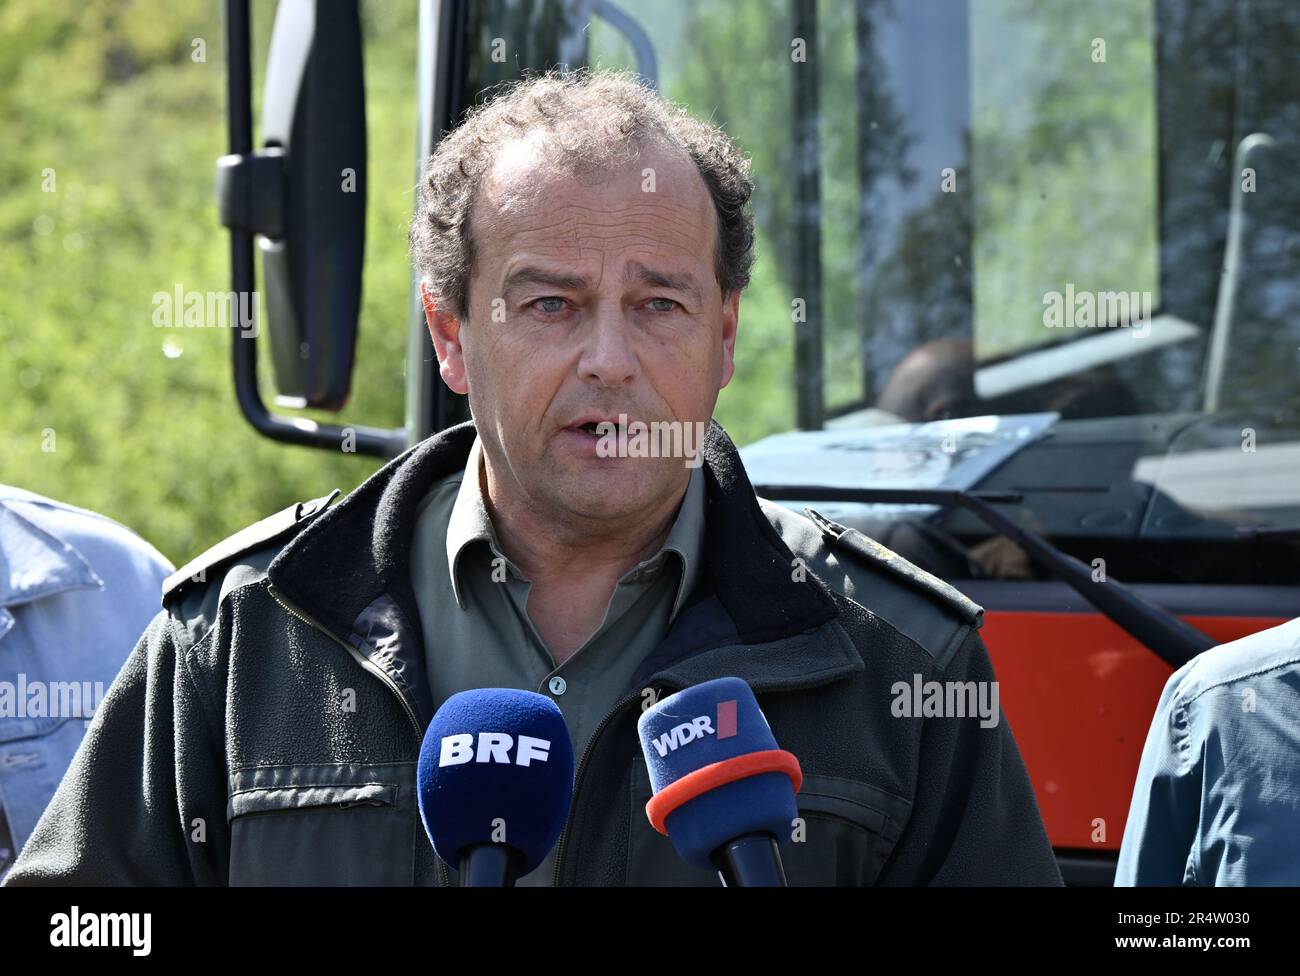 Rene Dahmen, head of cantonment DNF Elsenborn pictured during a press conference regarding the fire in the Hautes Fagnes between Ternell and Mutzenich, near the Belgian-German border, Tuesday 30 May 2023. More than 170 hectares of vegetation have already gone up in flames. The fire that was reportedly caused by humans started Monday evening and is still not under control. Belgian firefighters are being assisted by German colleagues and civil protection. They are equipped with a drone to monitor the area and the spread of the flames, a firefighting helicopter is expected to intervene later in t Stock Photo